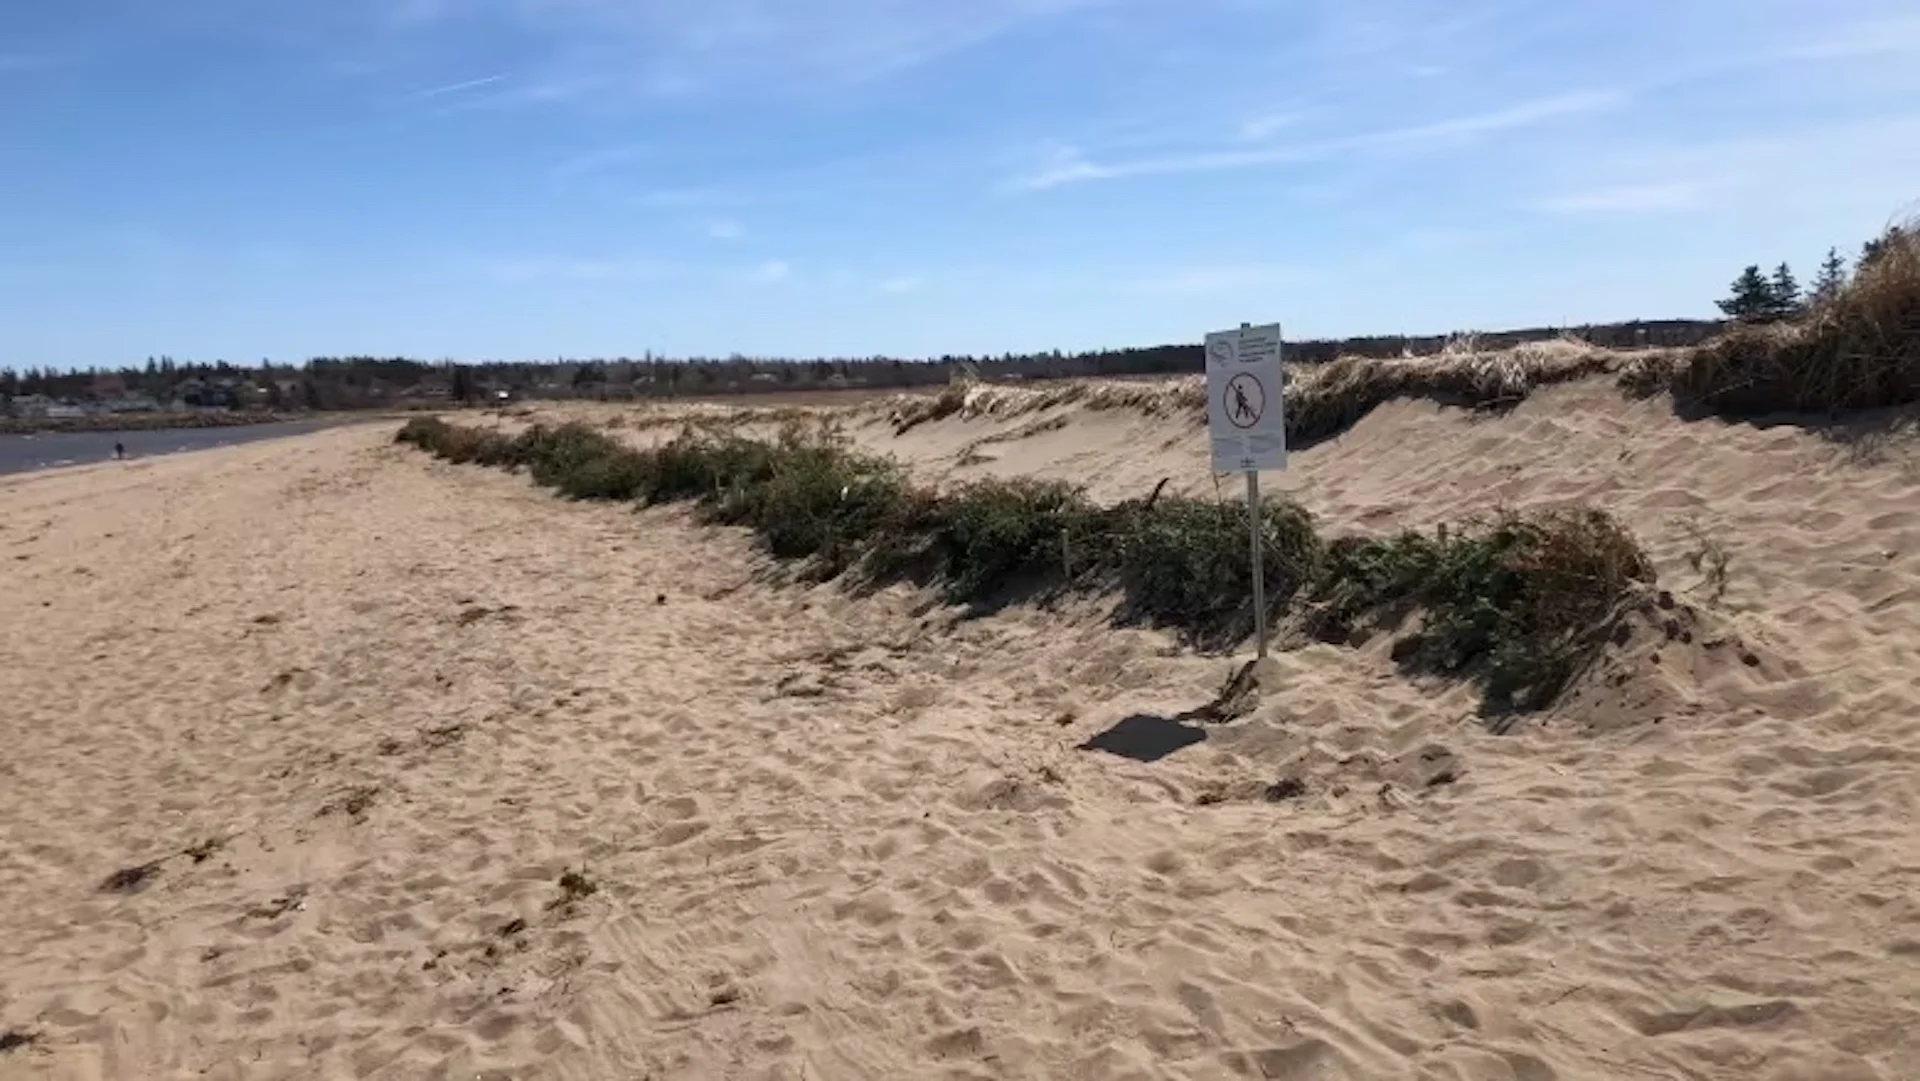 Beach lovers use Christmas trees to repair dunes damaged by major storms